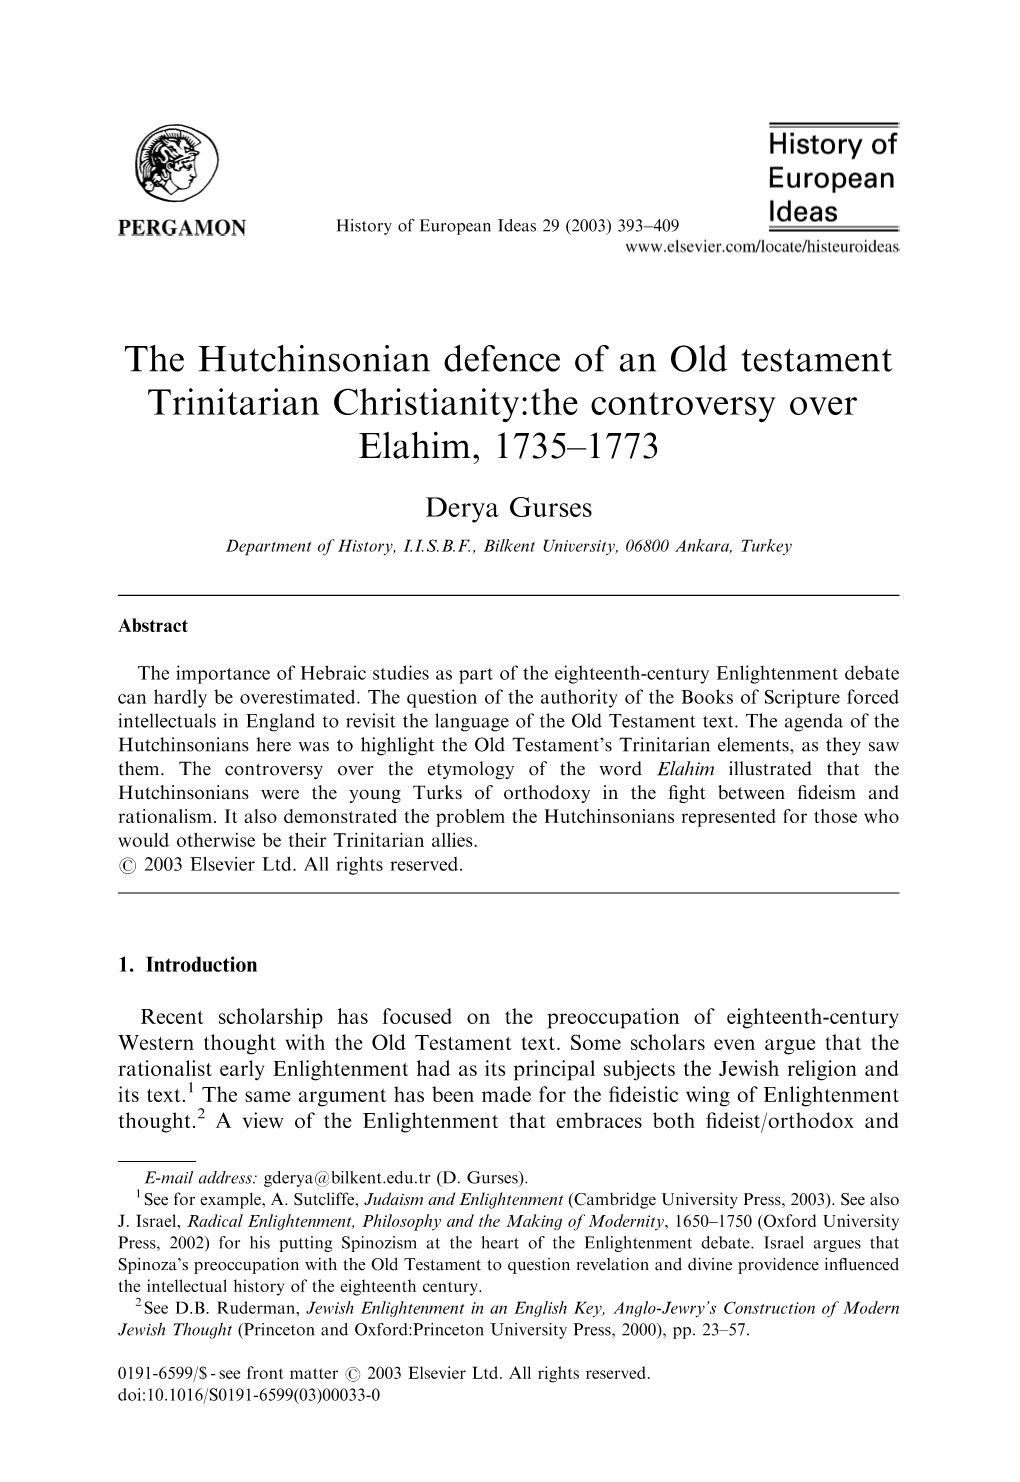 The Hutchinsonian Defence of an Old Testament Trinitarian Christianity:The Controversy Over Elahim, 1735–1773